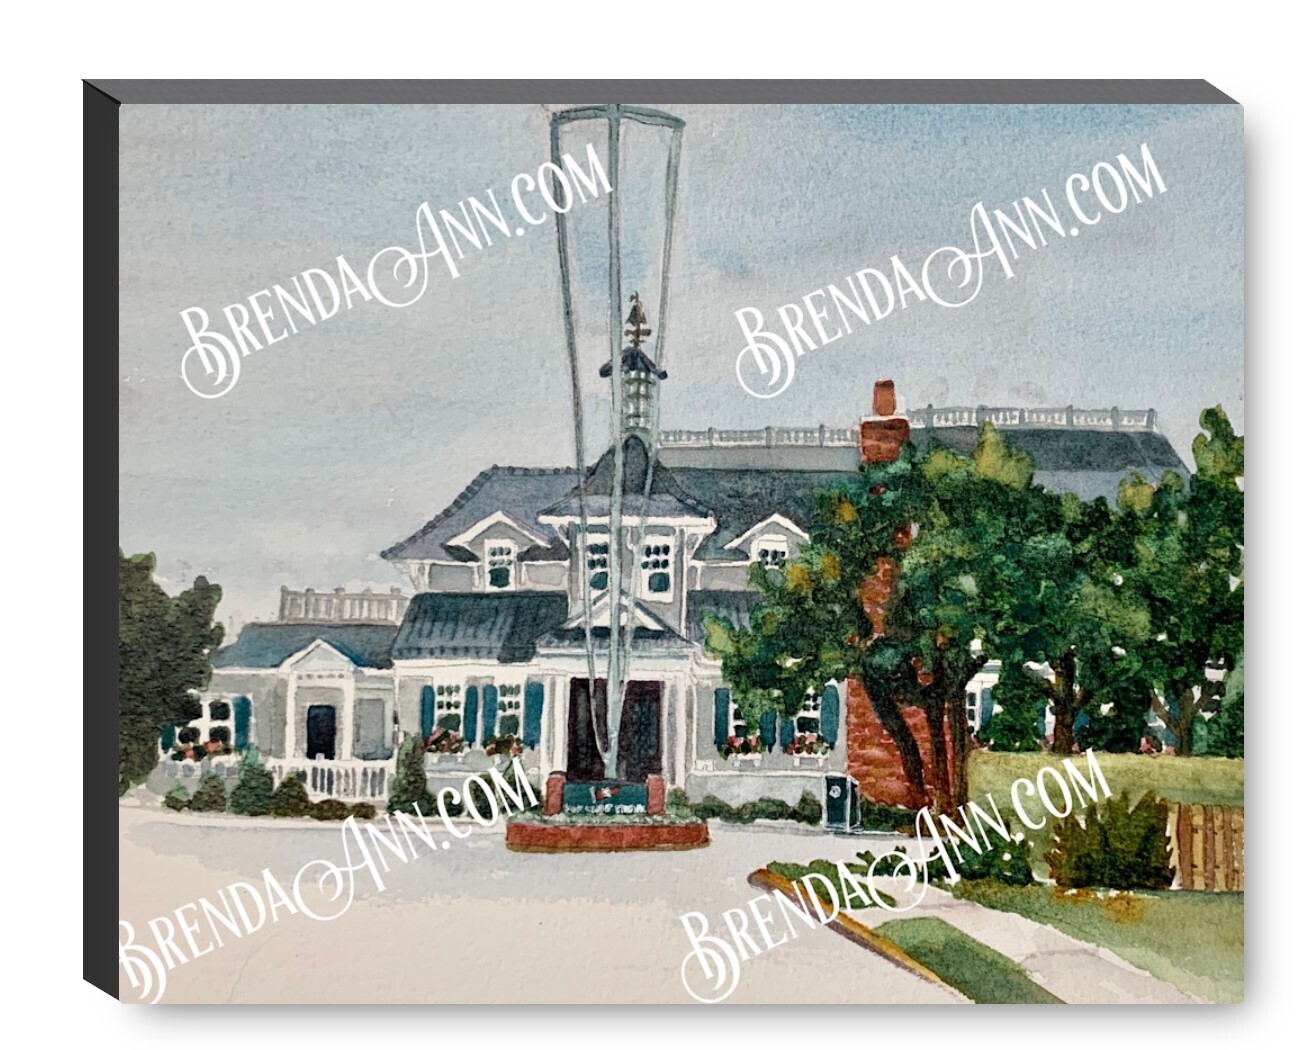 Yacht Club of Stone Harbor YCSH in Stone Harbor NJ Canvas Gallery Wrapped Print - Watercolor Art - Ready to hang on a wall